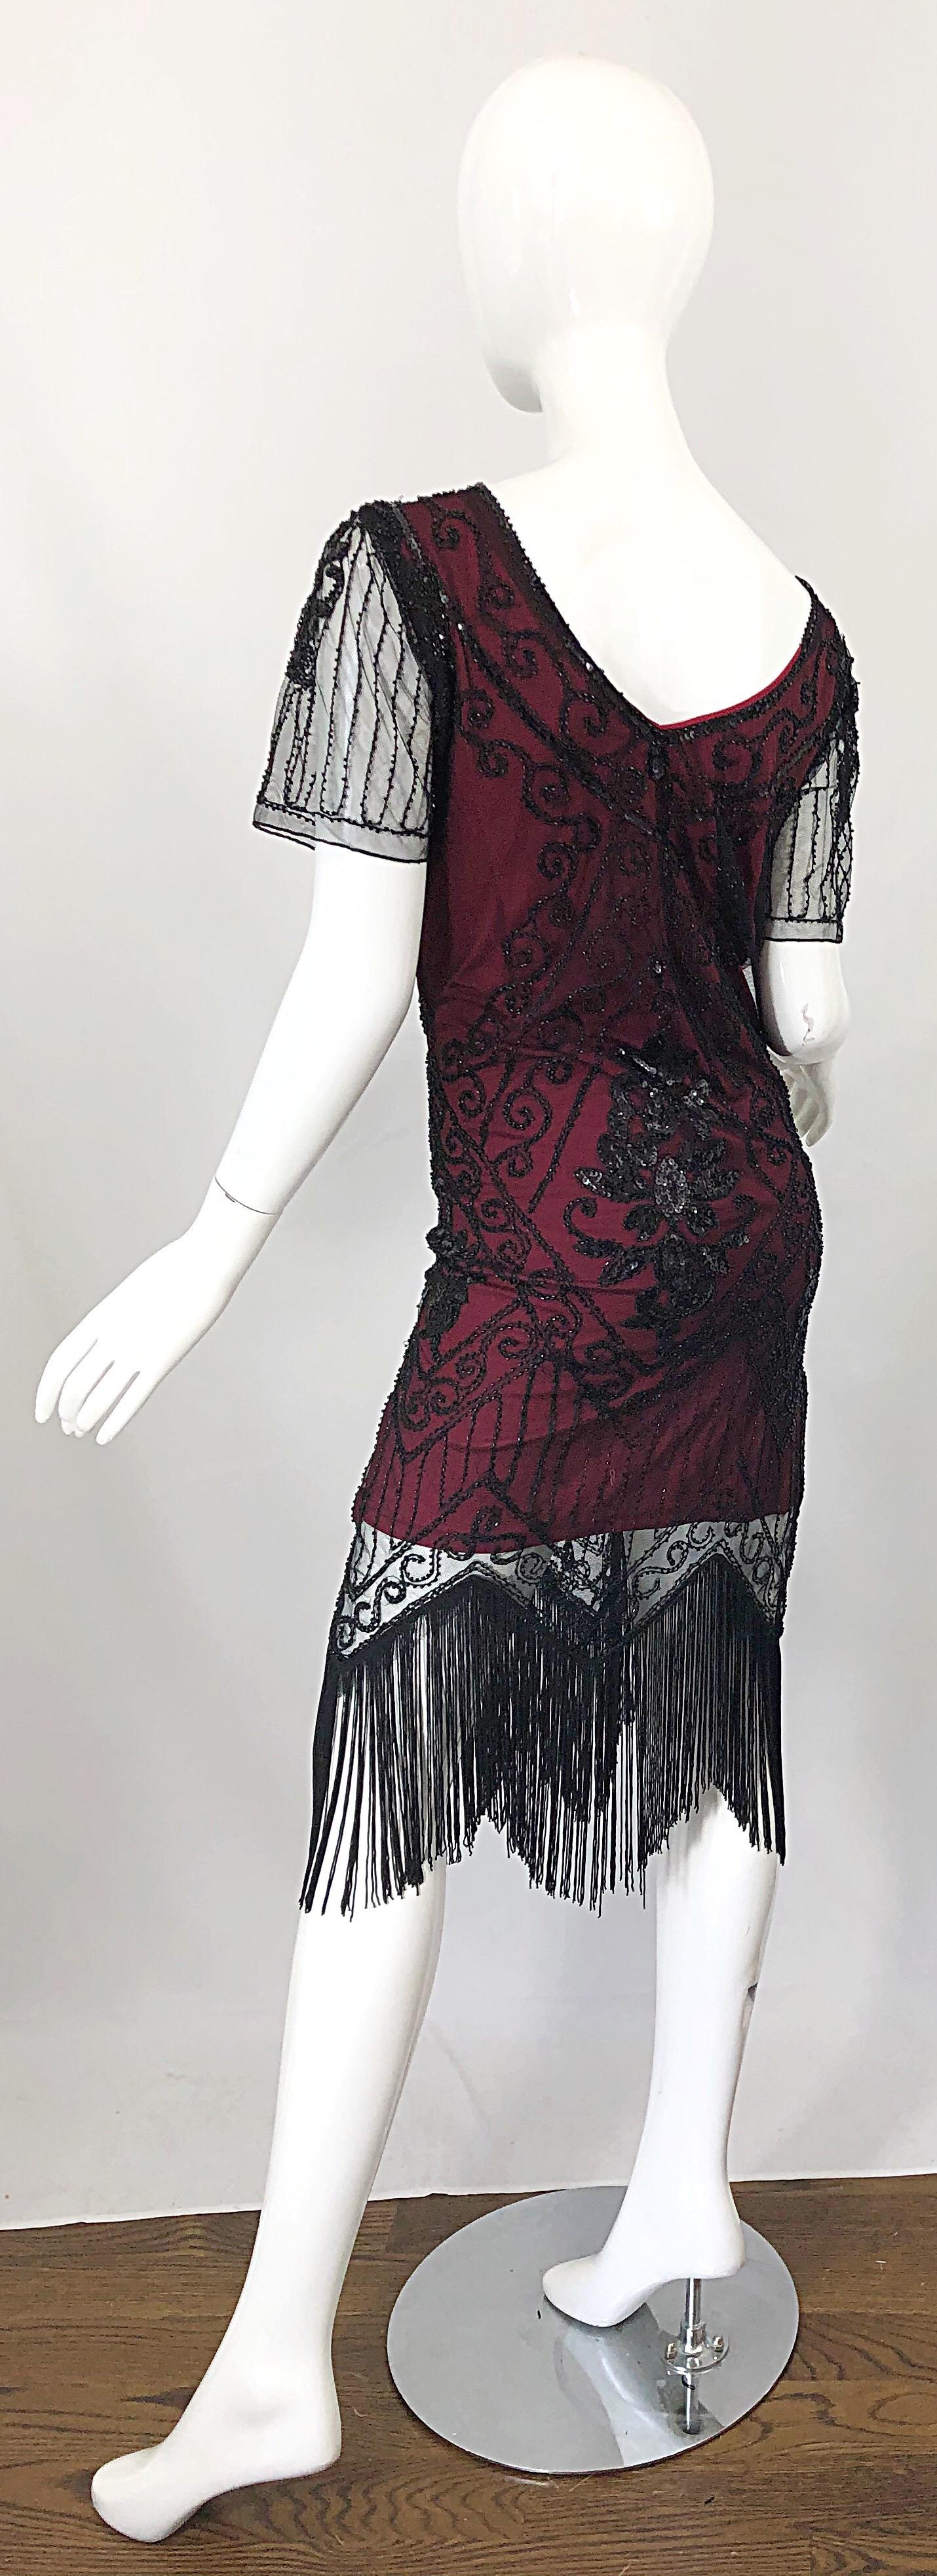 Women's 1990s Does 1920s Black and Red Burgundy Lace Beaded Fringe Vintage Flapper Dress For Sale